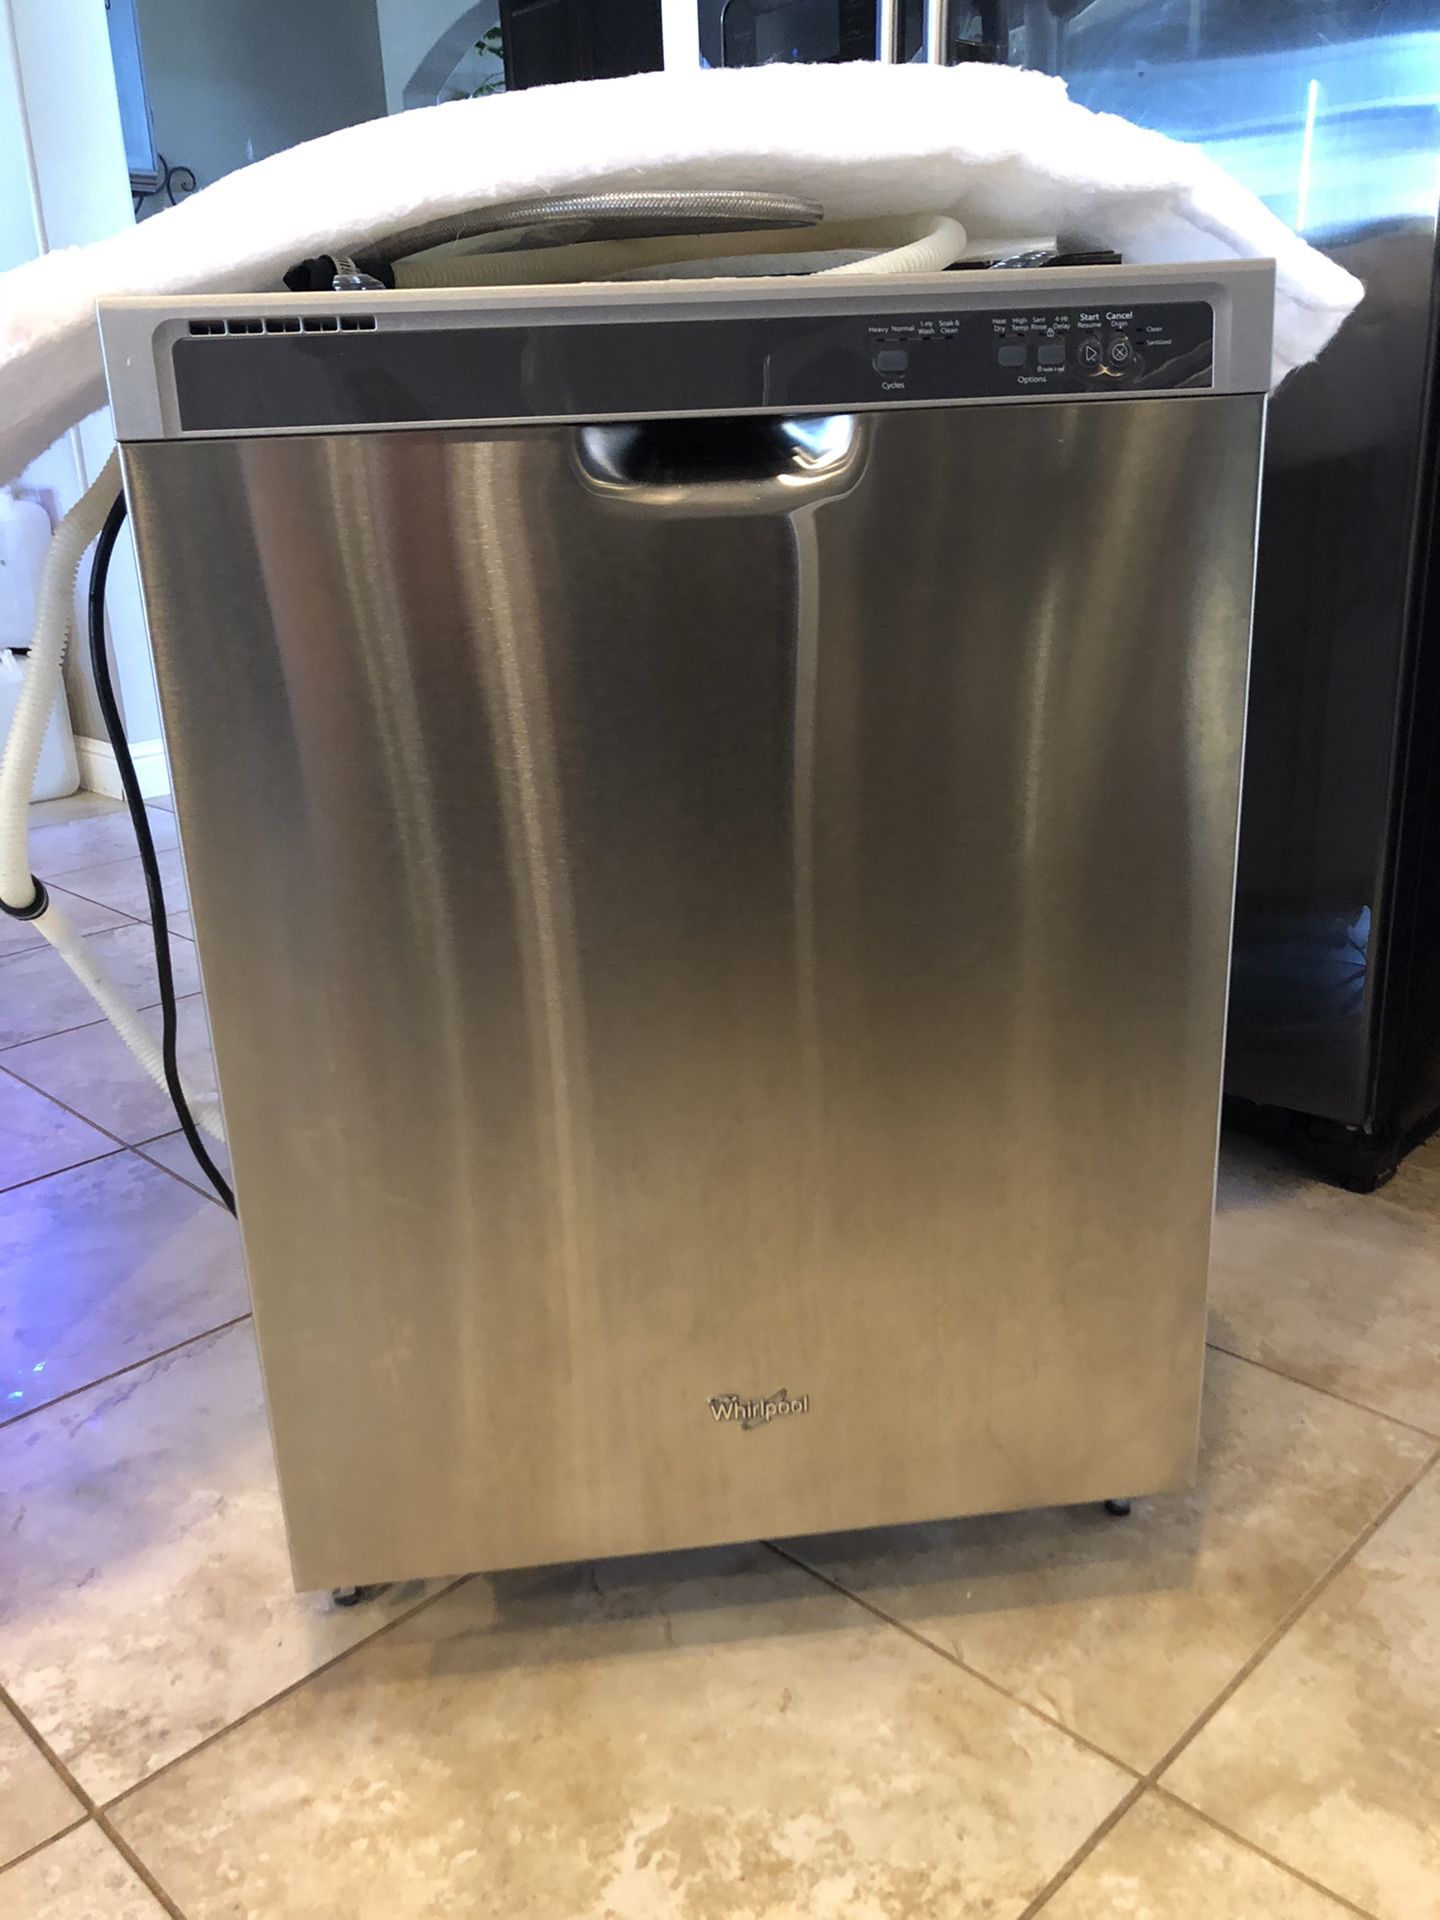 FREE Whirlpool Dishwasher 2-3 years old you must pick up!